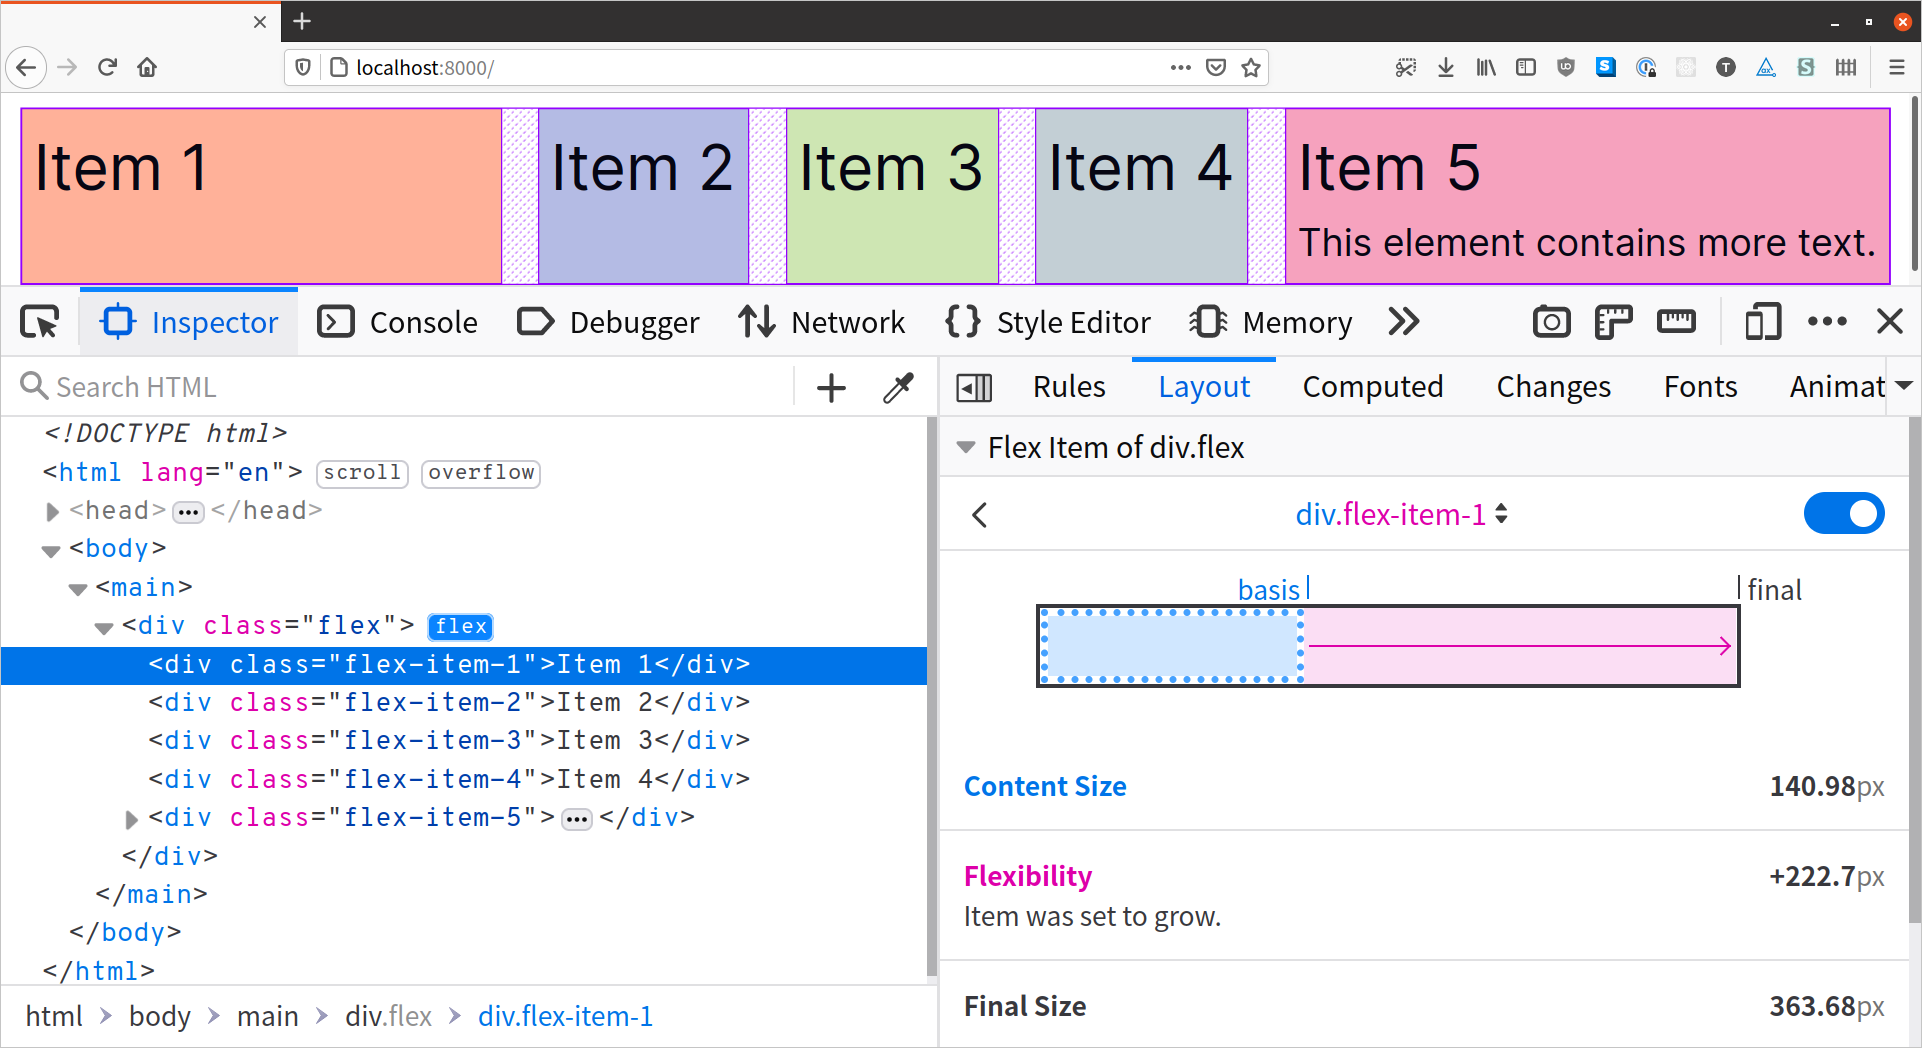 The Firefox flex inspector also indicates when a flex item is set to grow or shrink